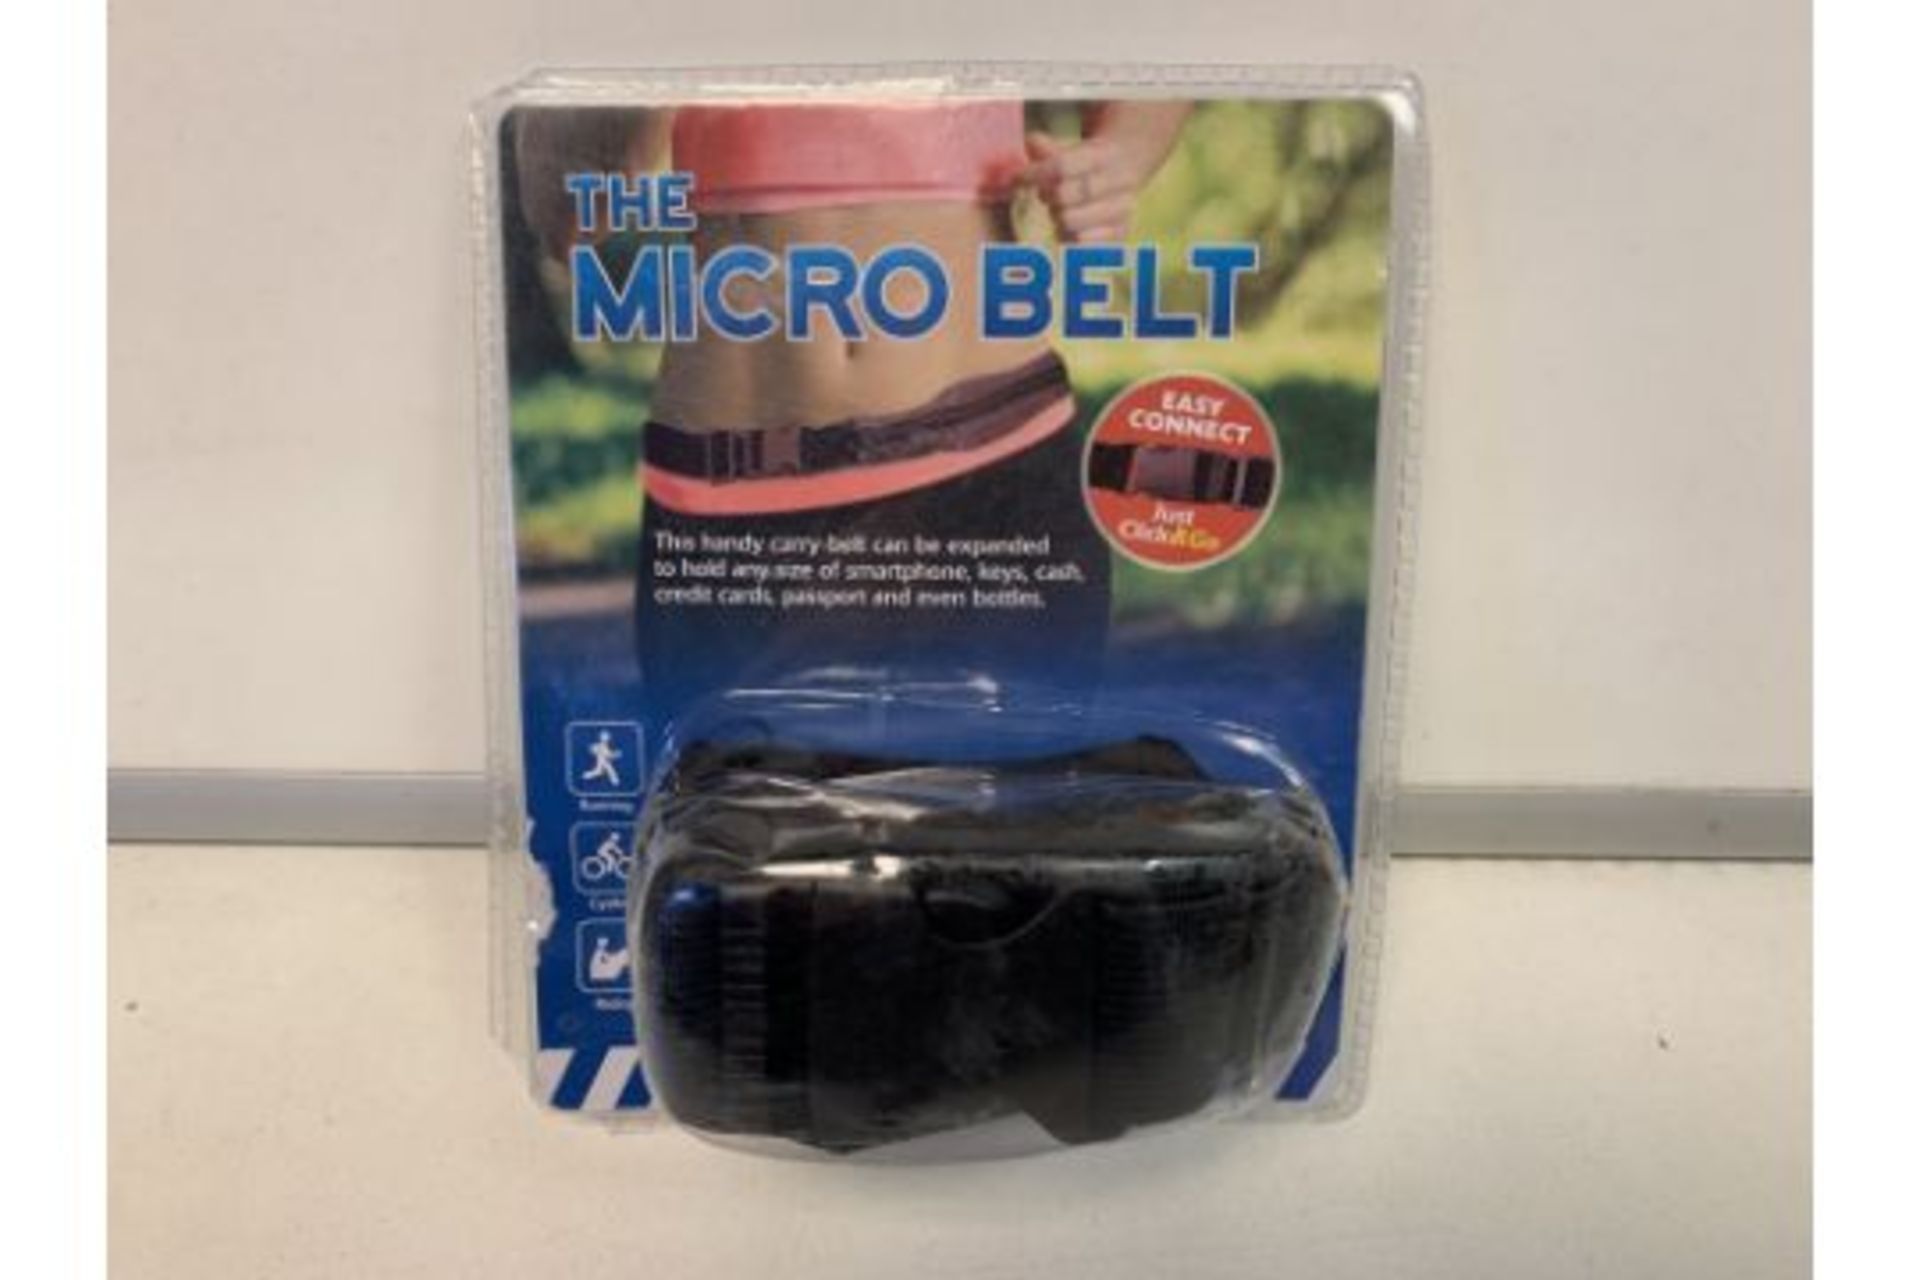 60 X NEW PACKAGED 'THE MICRO BELTS' HAND CARRY BELT CAN BE EXPANDED TO HOLD ANY SIZE OF